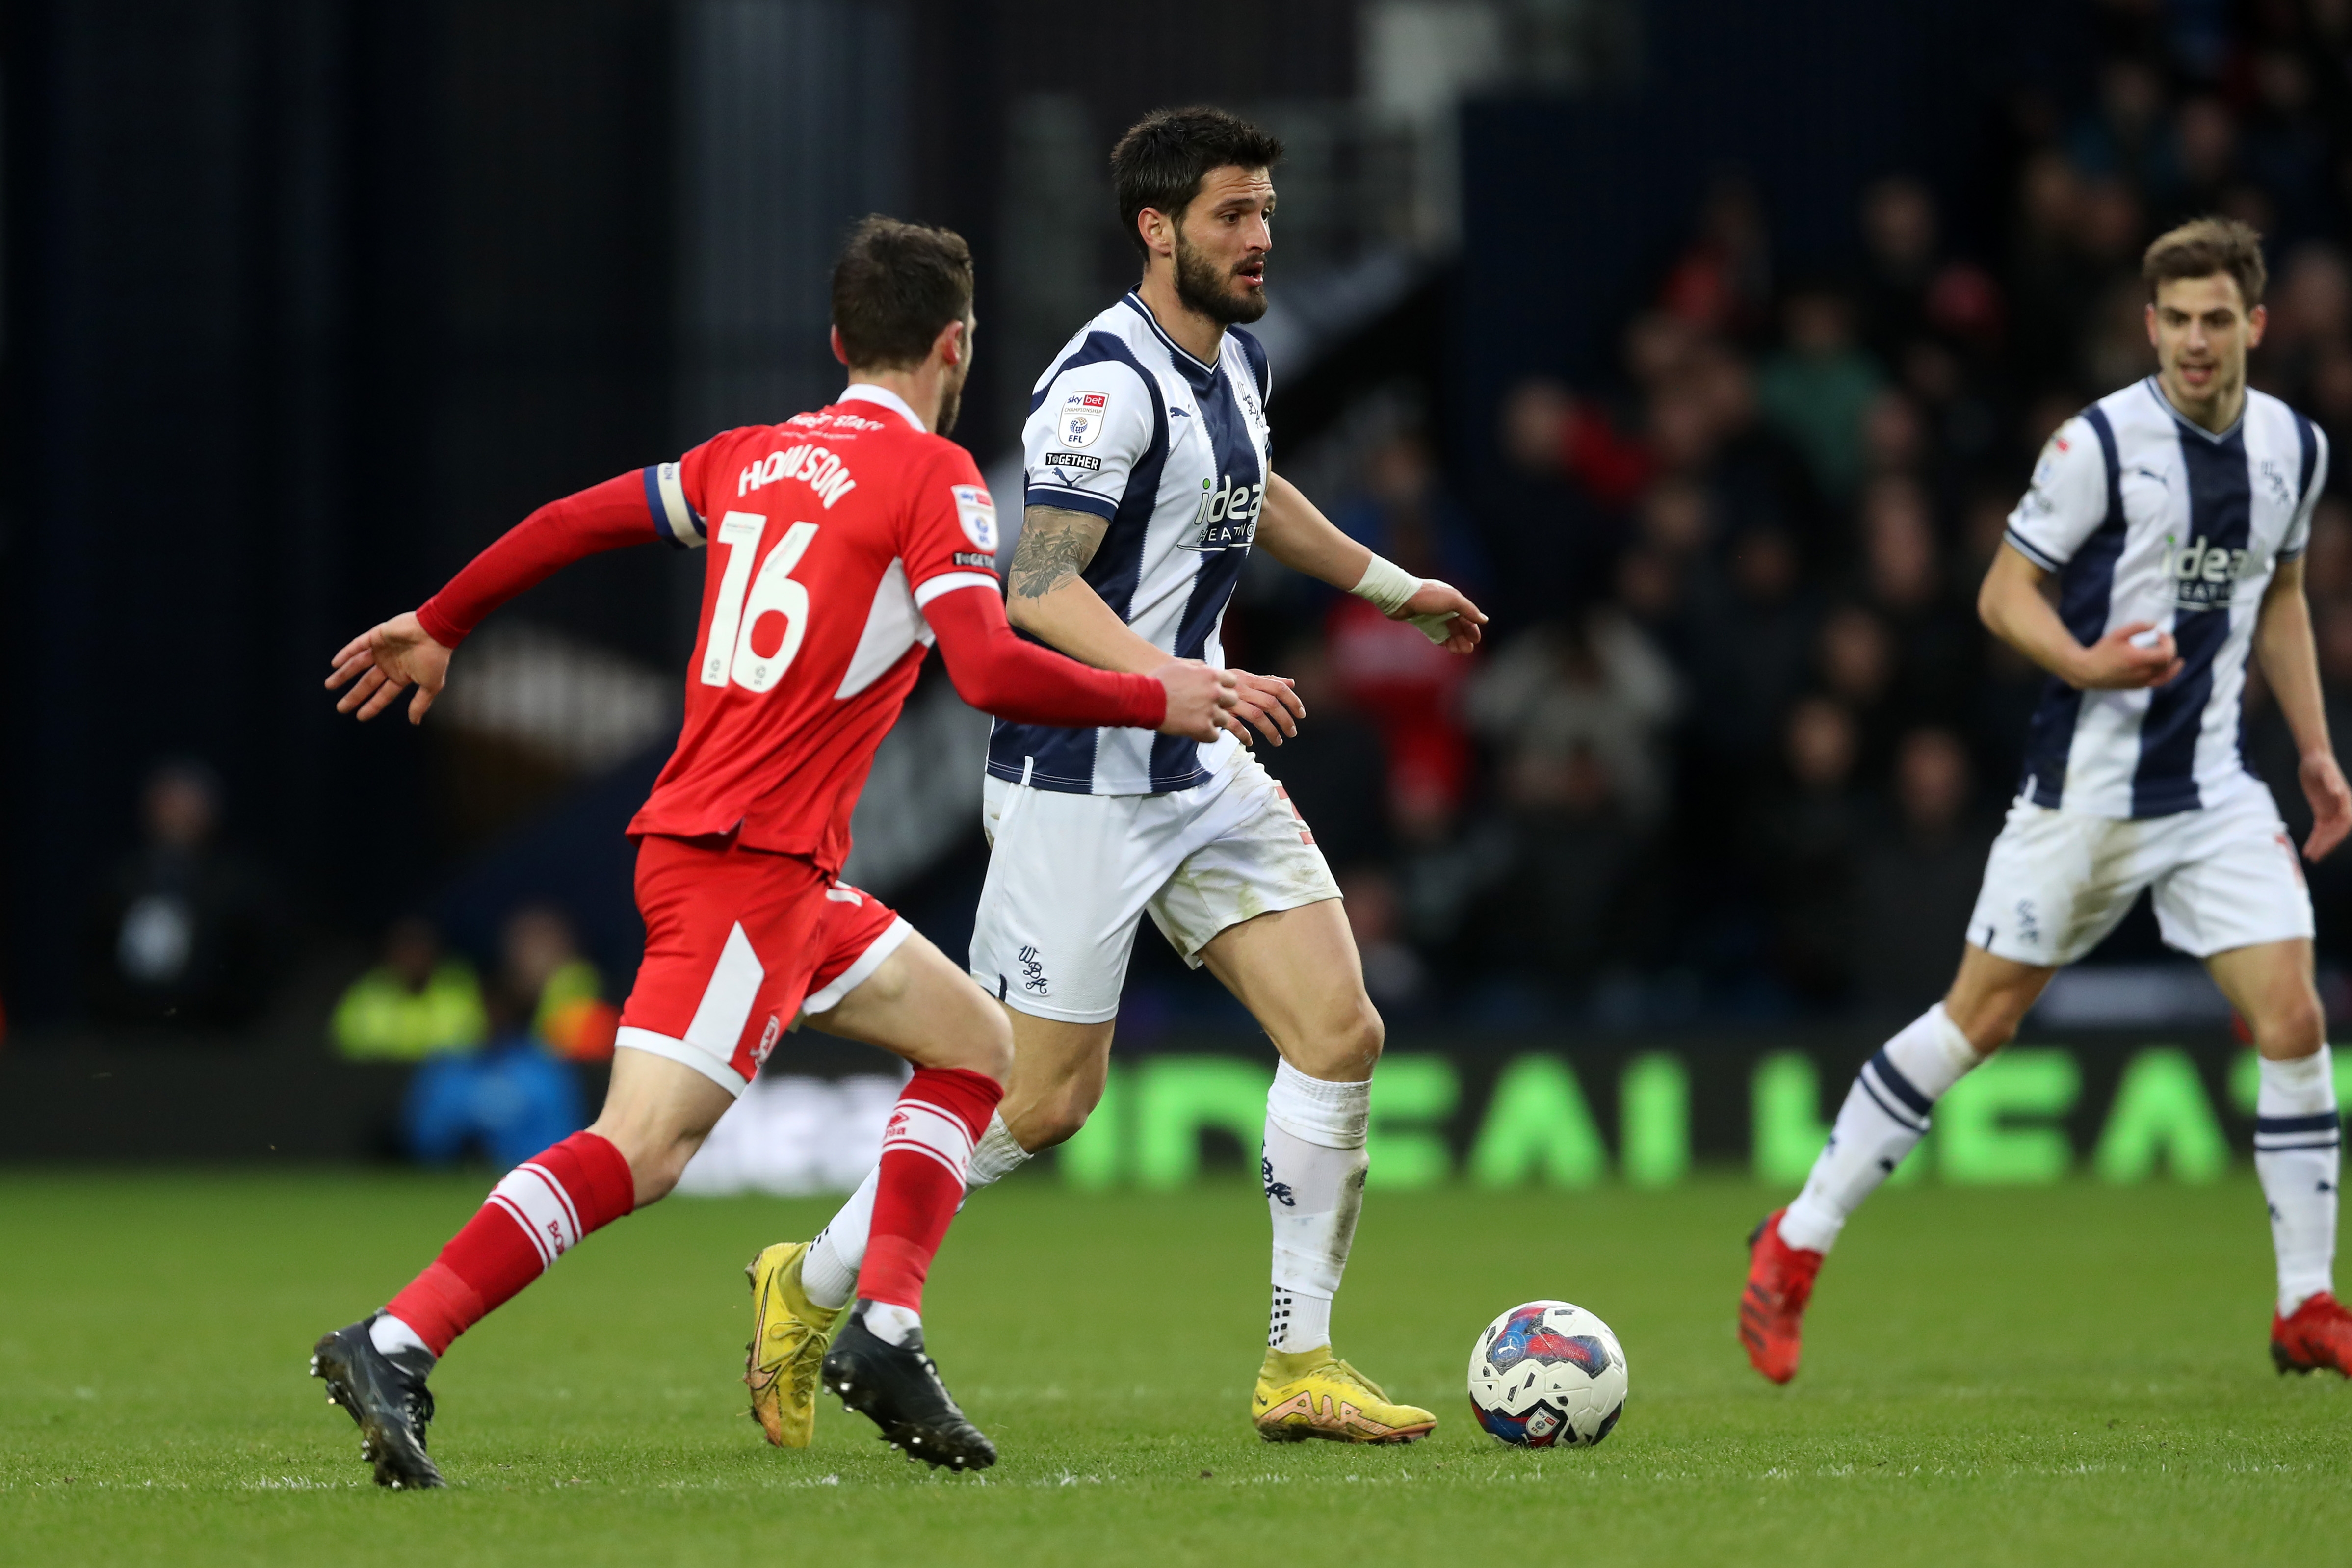 West Bromwich Albion 2-0 Middlesbrough: Daryl Dike double beats Boro to end  bad Baggies run - BBC Sport